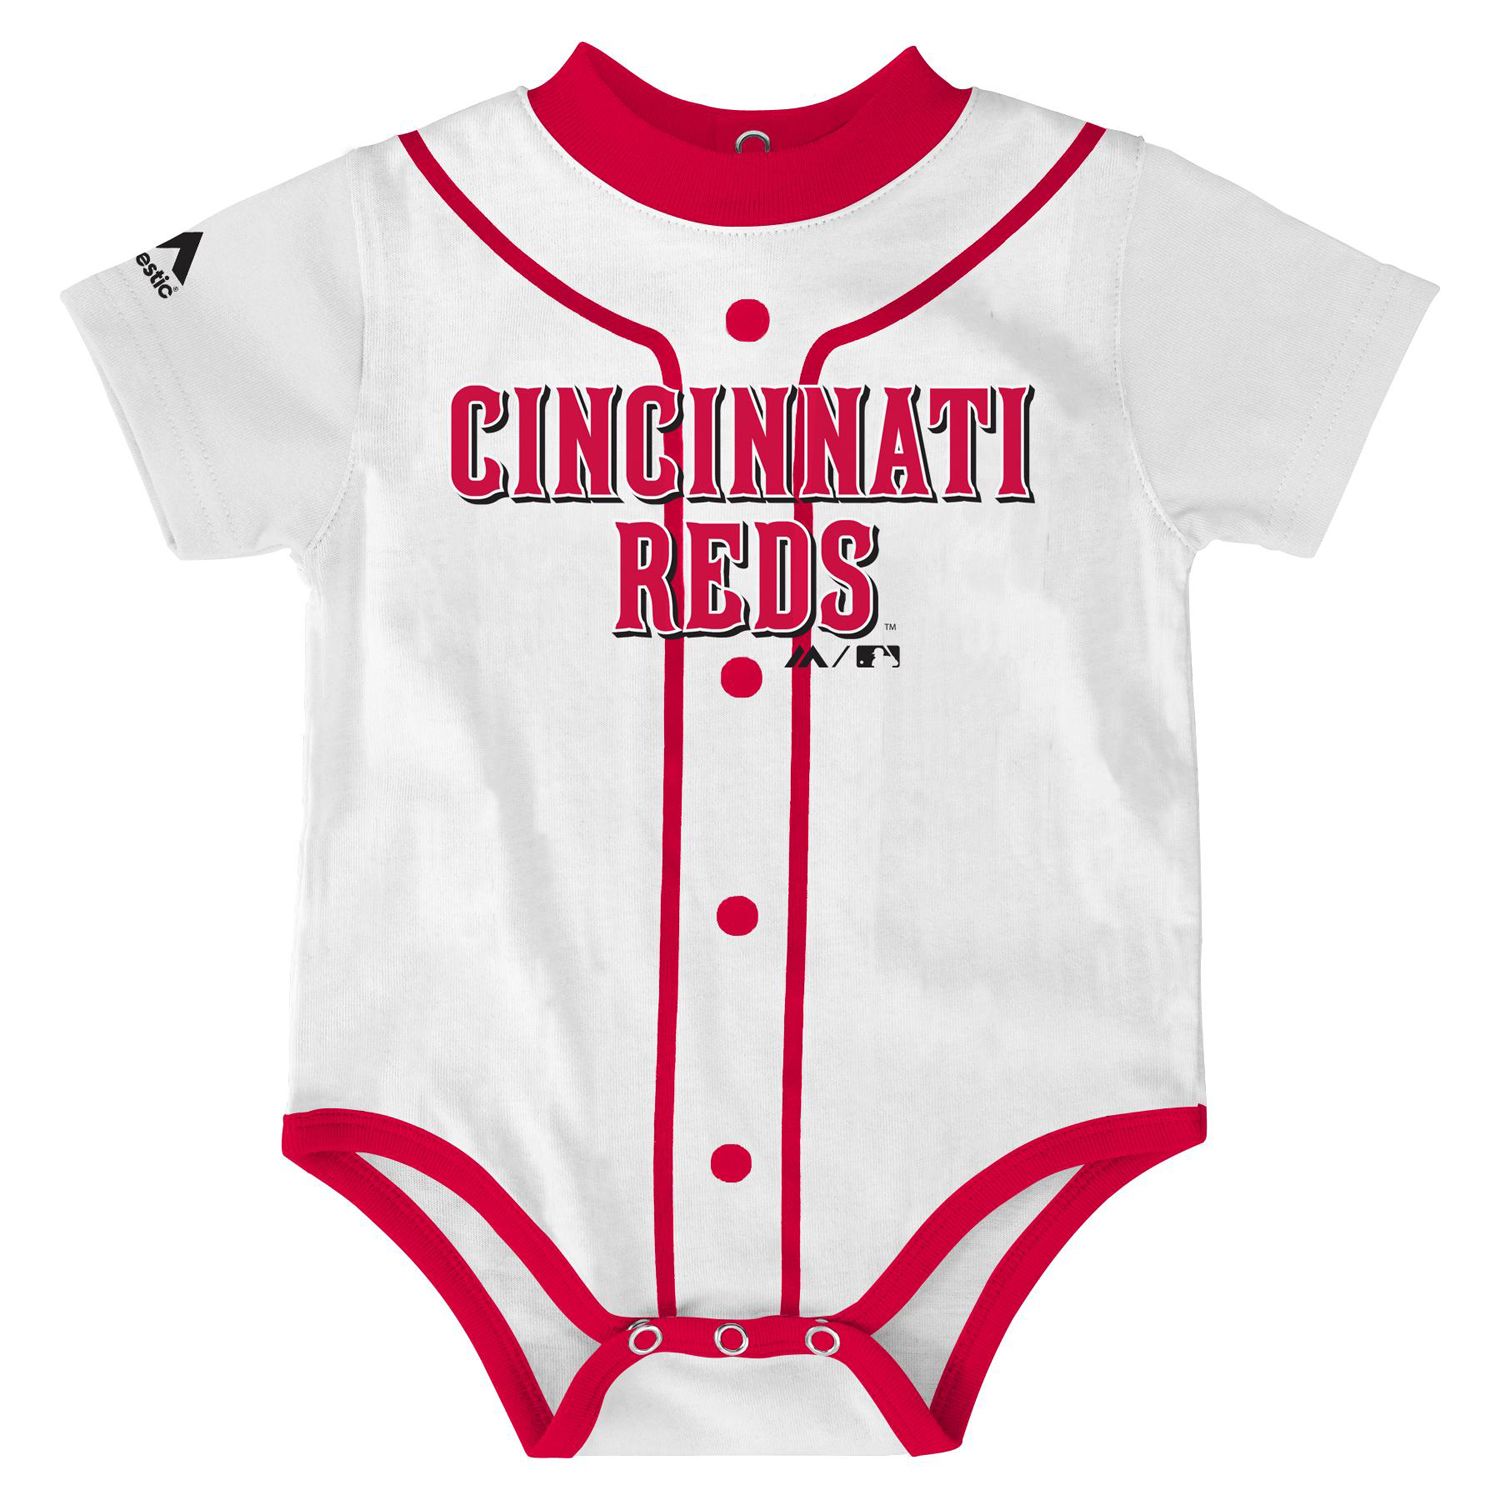 baby reds jersey